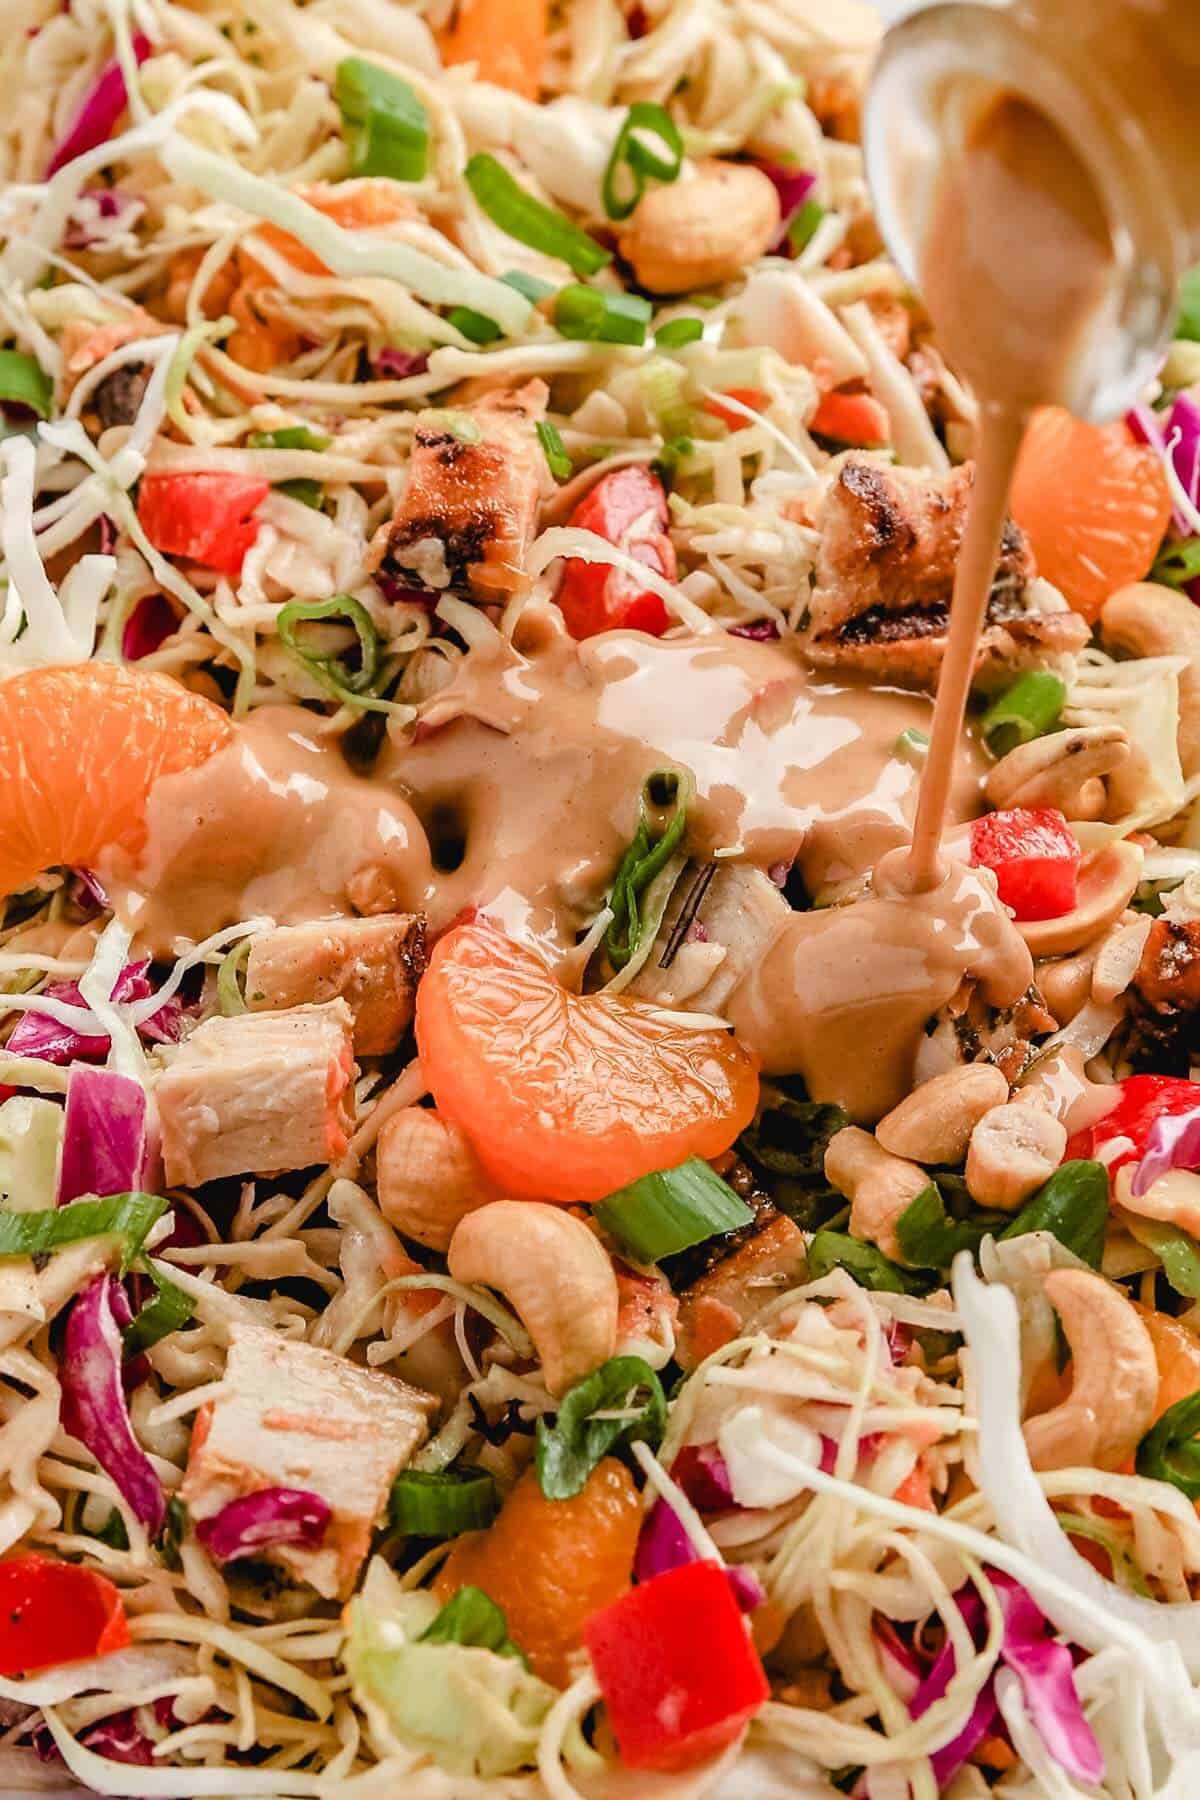 Asian Chicken Salad drizzled with creamy peanut dressing